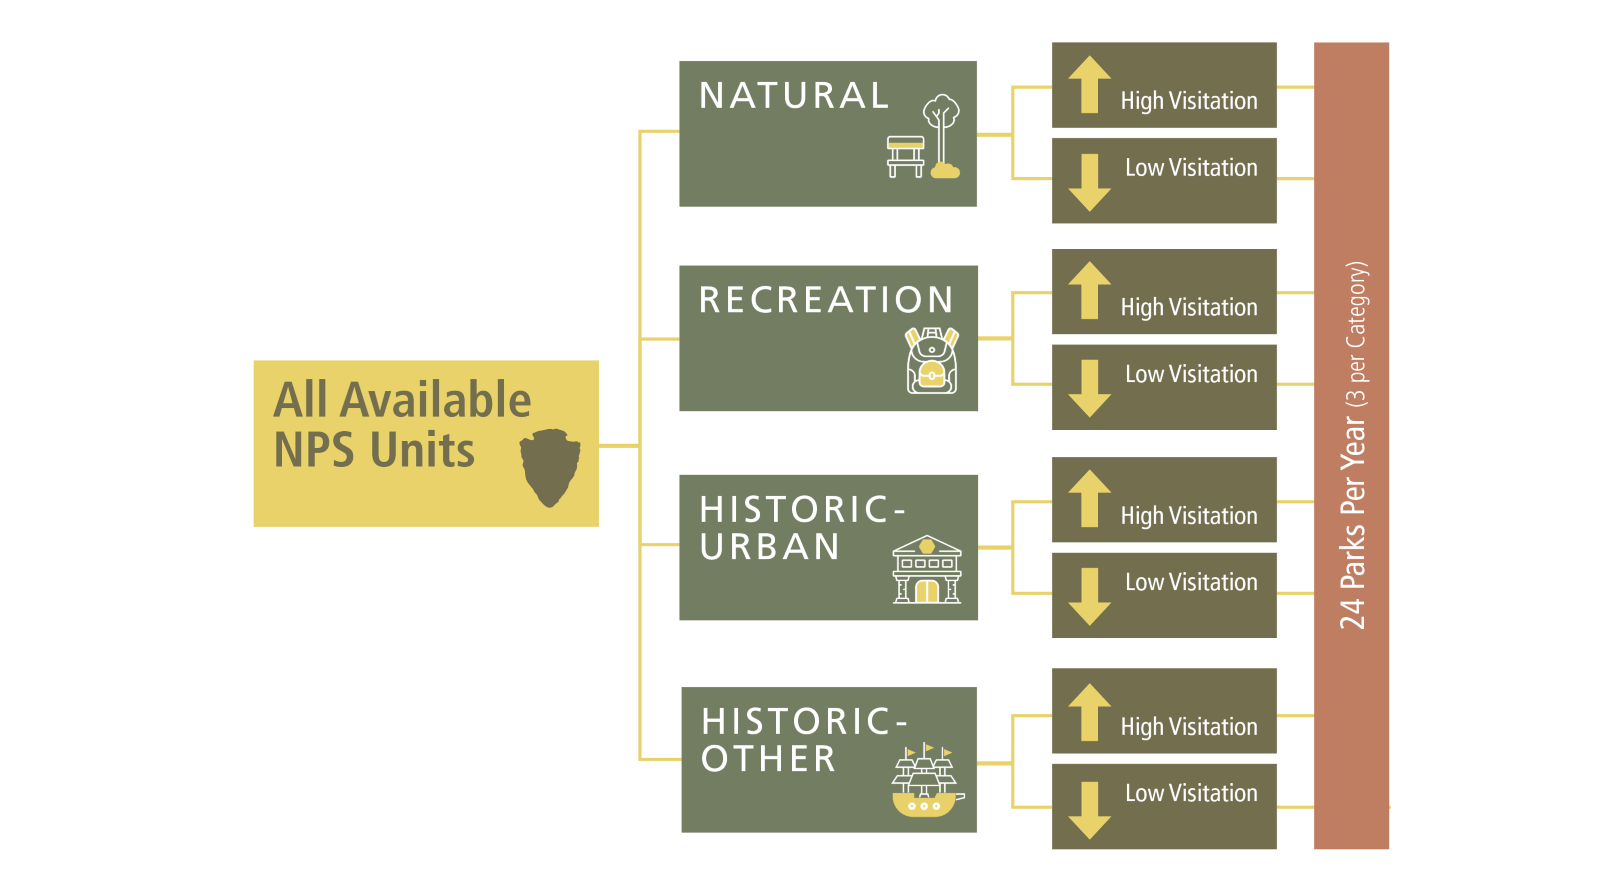 A flow chart working from left to right showing how all available park units are broken down into categories based on park type and then by visitation level (high or low). Each year, three parks are selected from each subsection for a total of 24 parks.